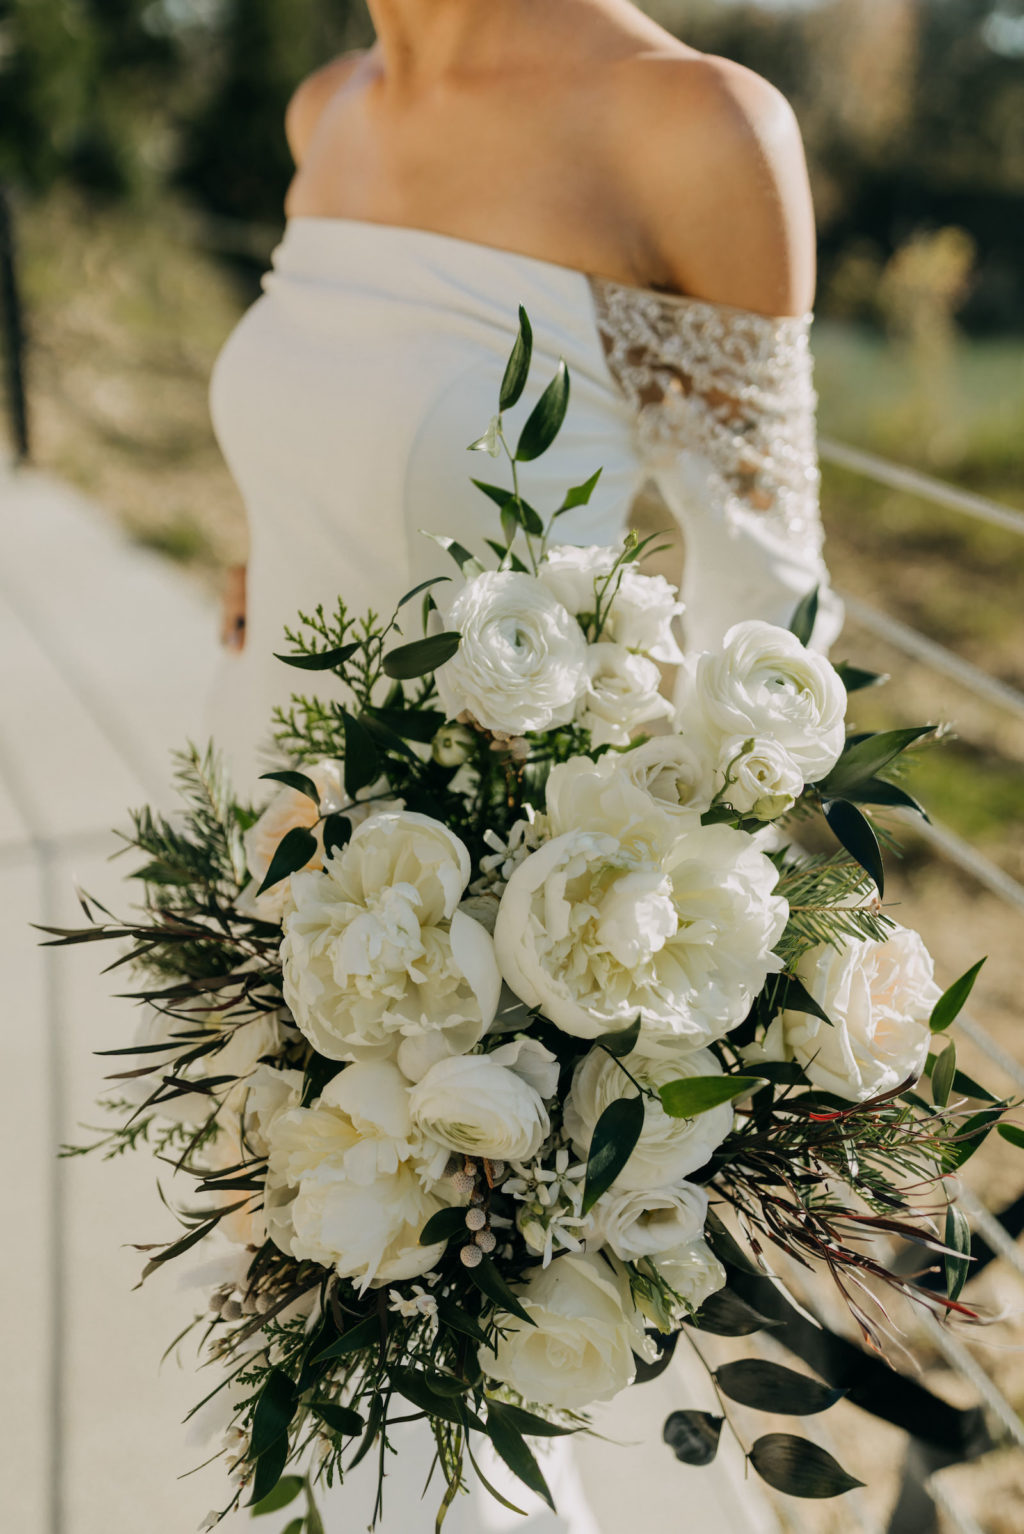 Florida Winter Wedding Bouquet with White Peony Garden Roses, Ranunculus, and Pine Greenery | Off the Shoulder Lace Sleeve Wedding Gown Bridal Dress | Amber McWhorter Photography